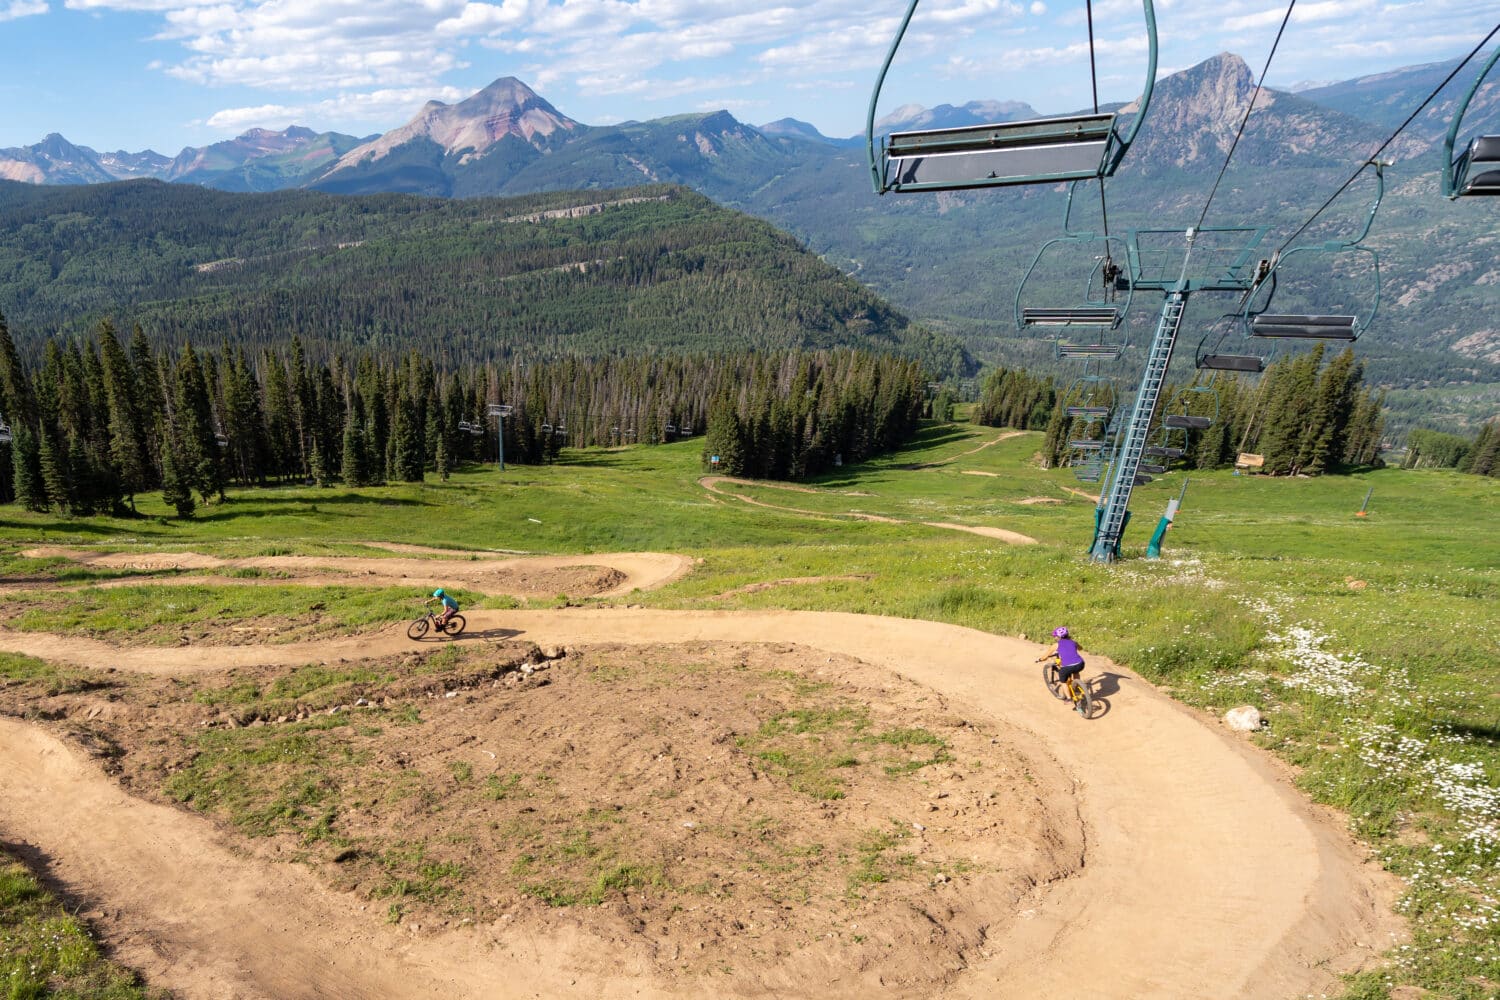 Meet Purgatory's bike park with trails for everyone